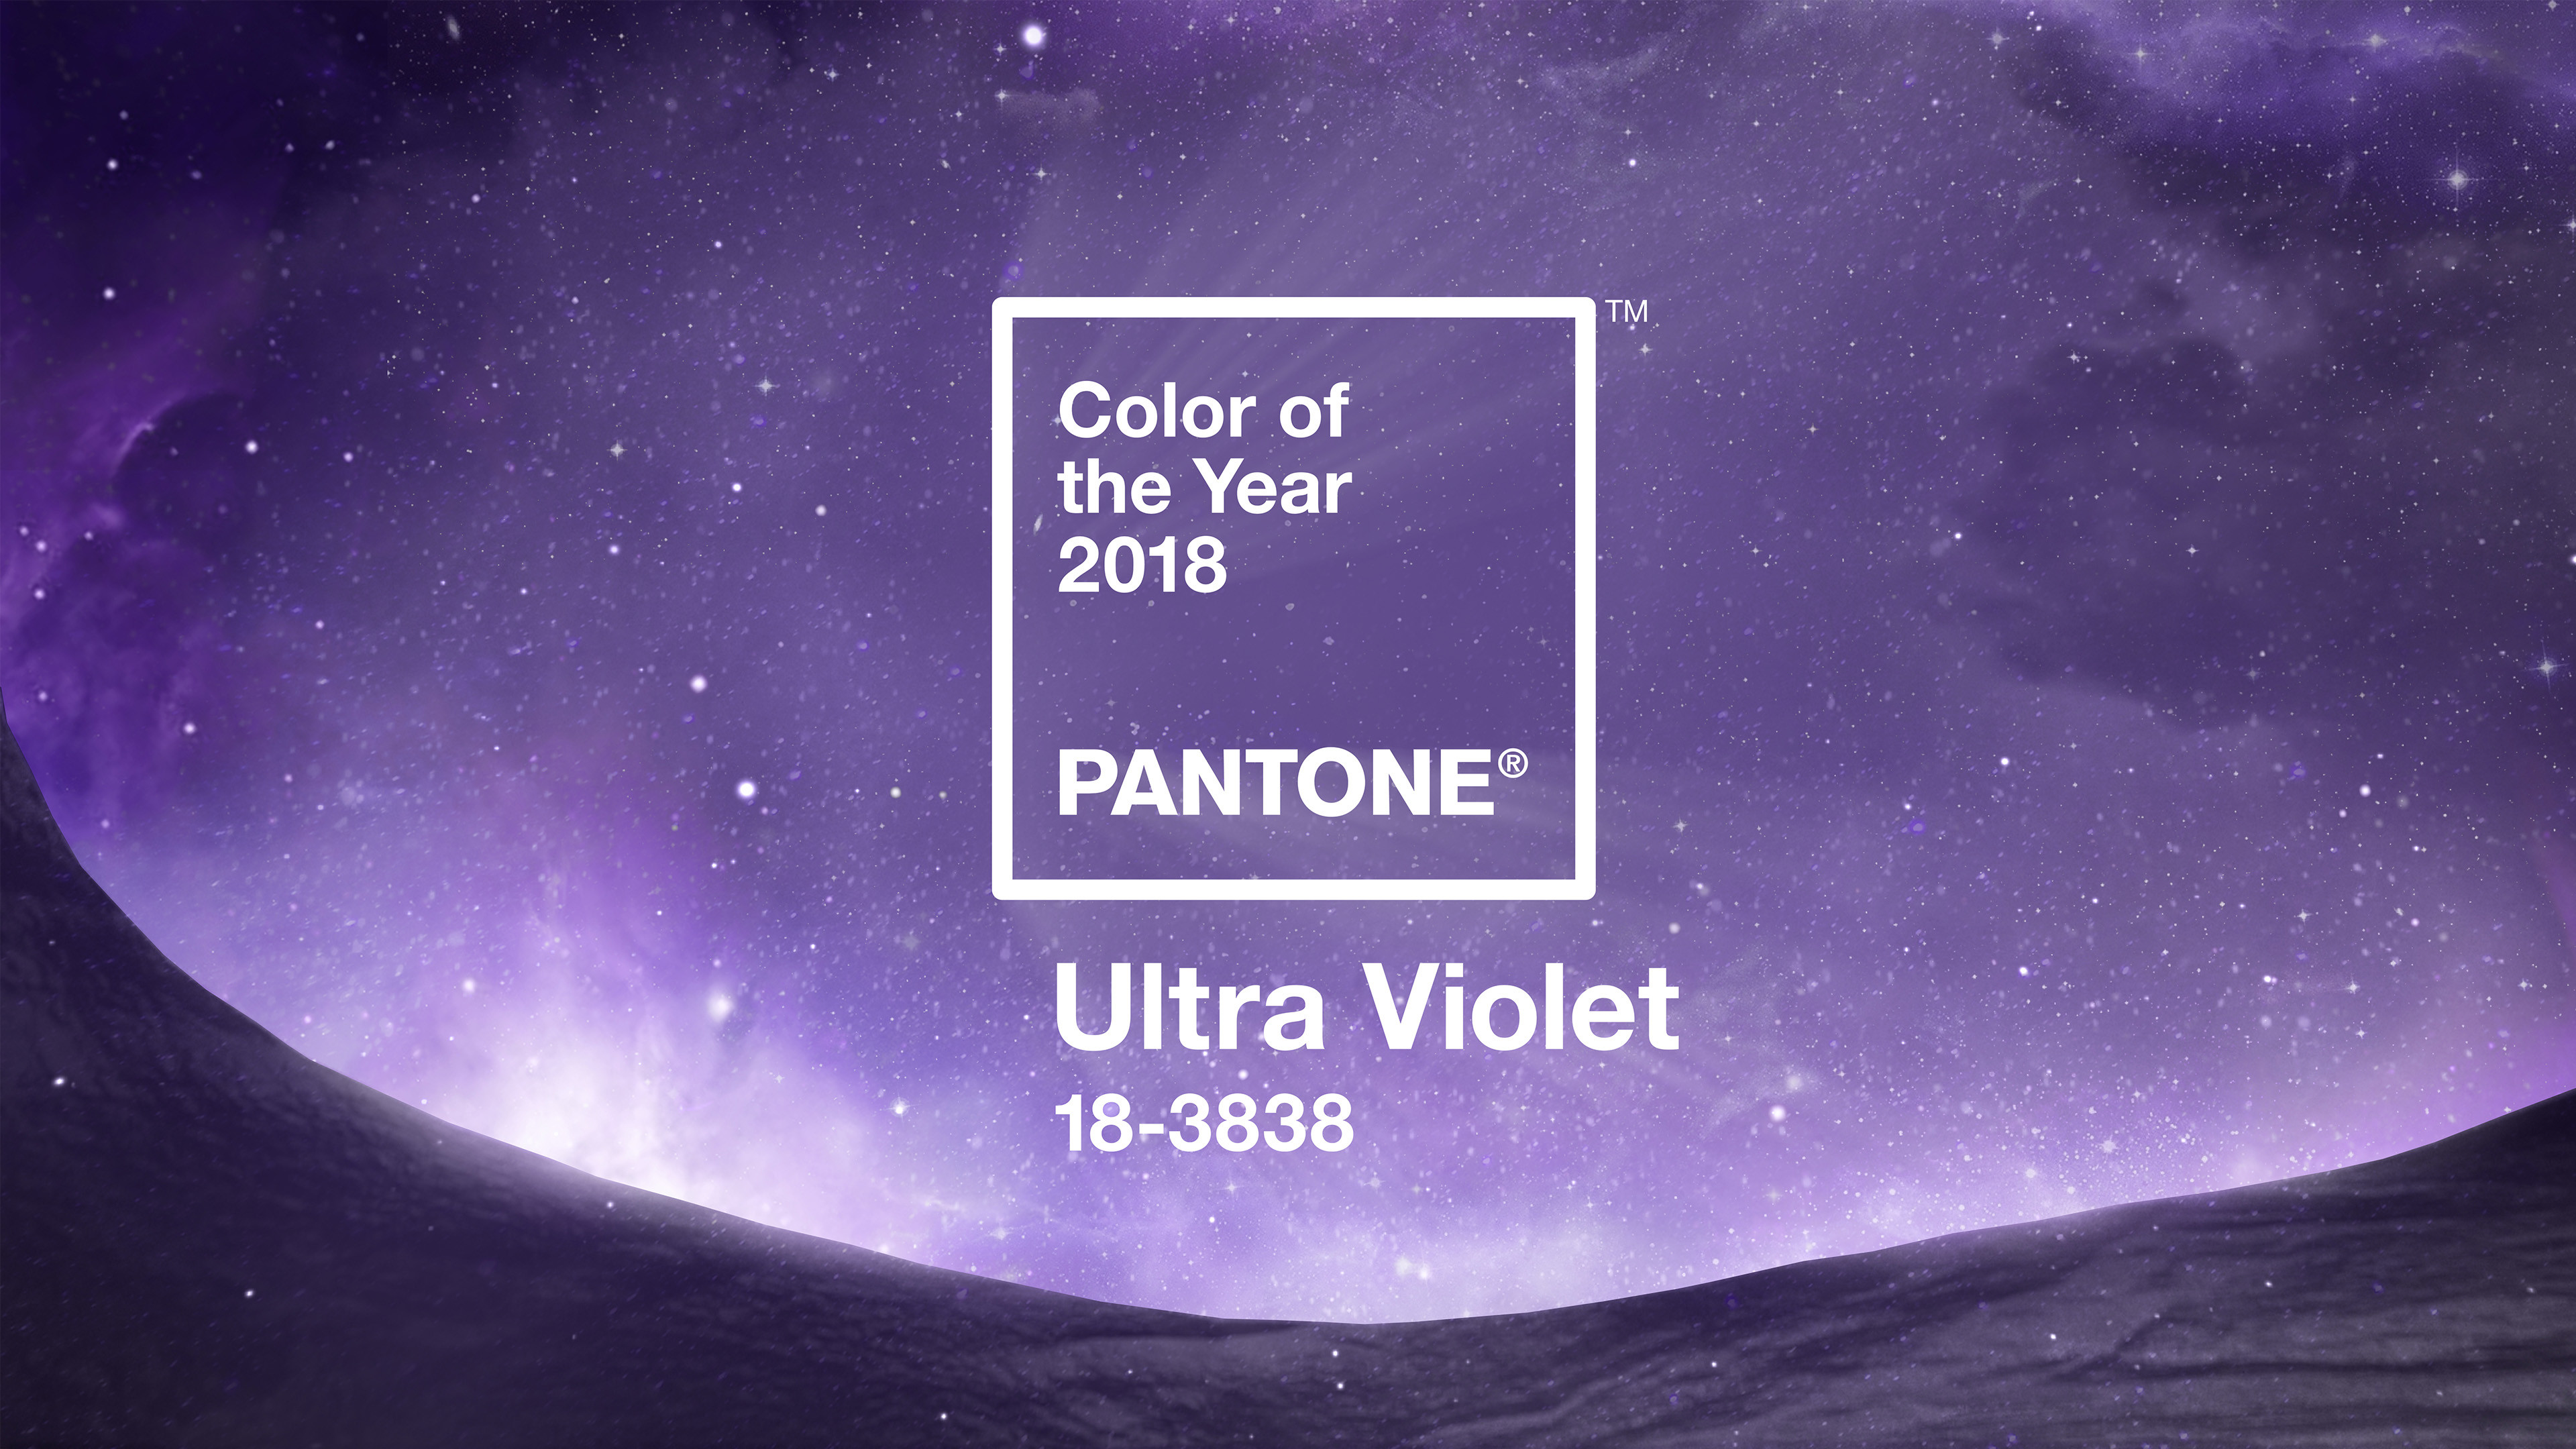 3840x2160 Pantone Color of the Year 2018 Digital Wallpapers - Ultra Violet ...